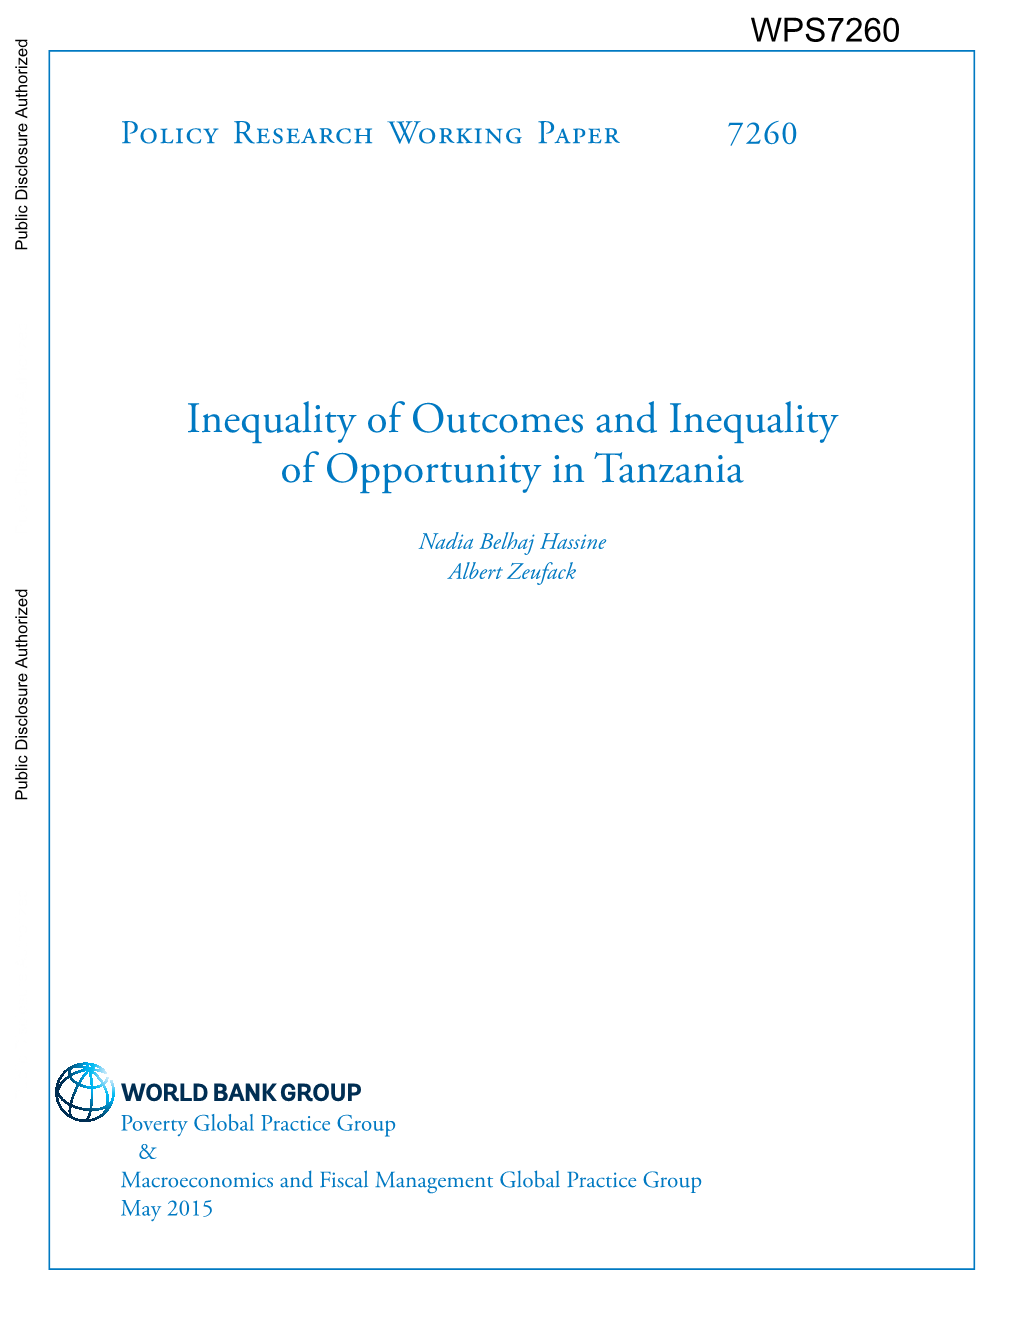 Inequality of Outcomes and Inequality of Opportunity in Tanzania